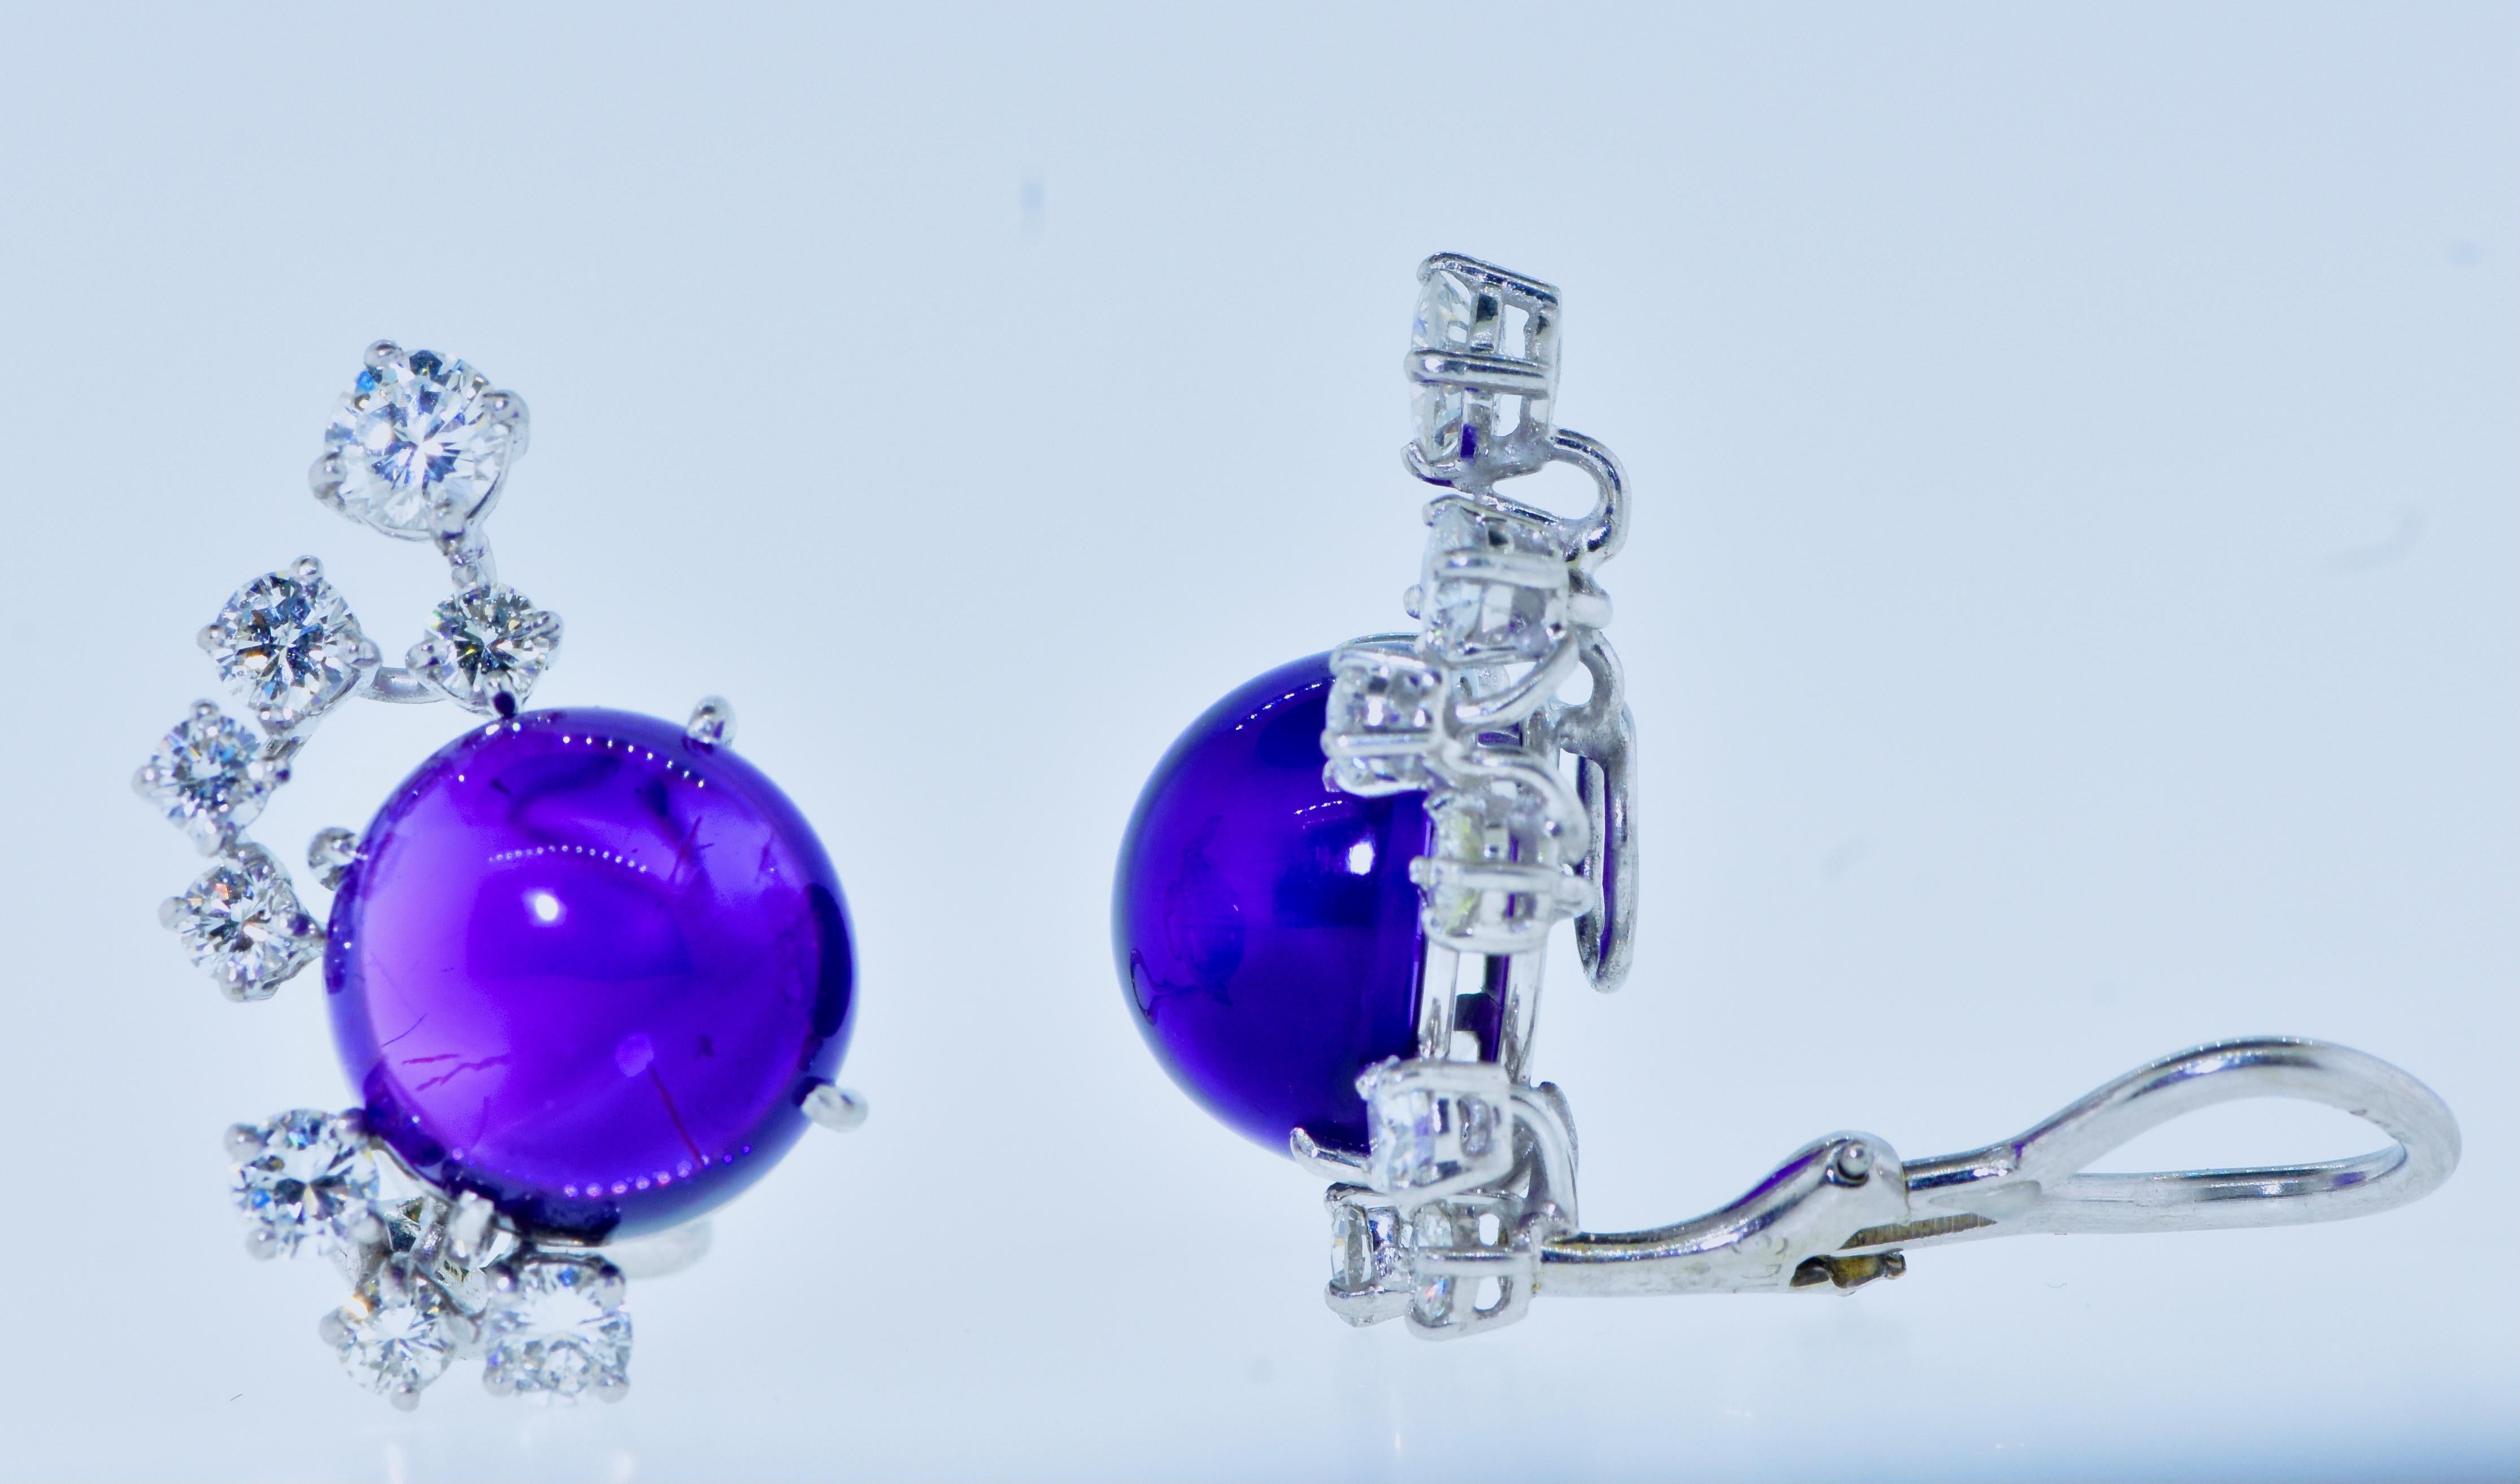 Amethyst, diamond and platinum earrings.  The two amethysts  weigh an estimated 7.6 cts.  The stones are high cabochon cut,  a deep velvety purple color with a hint of red undertones.  16 round brilliant cut white diamonds accent the amethysts.  The